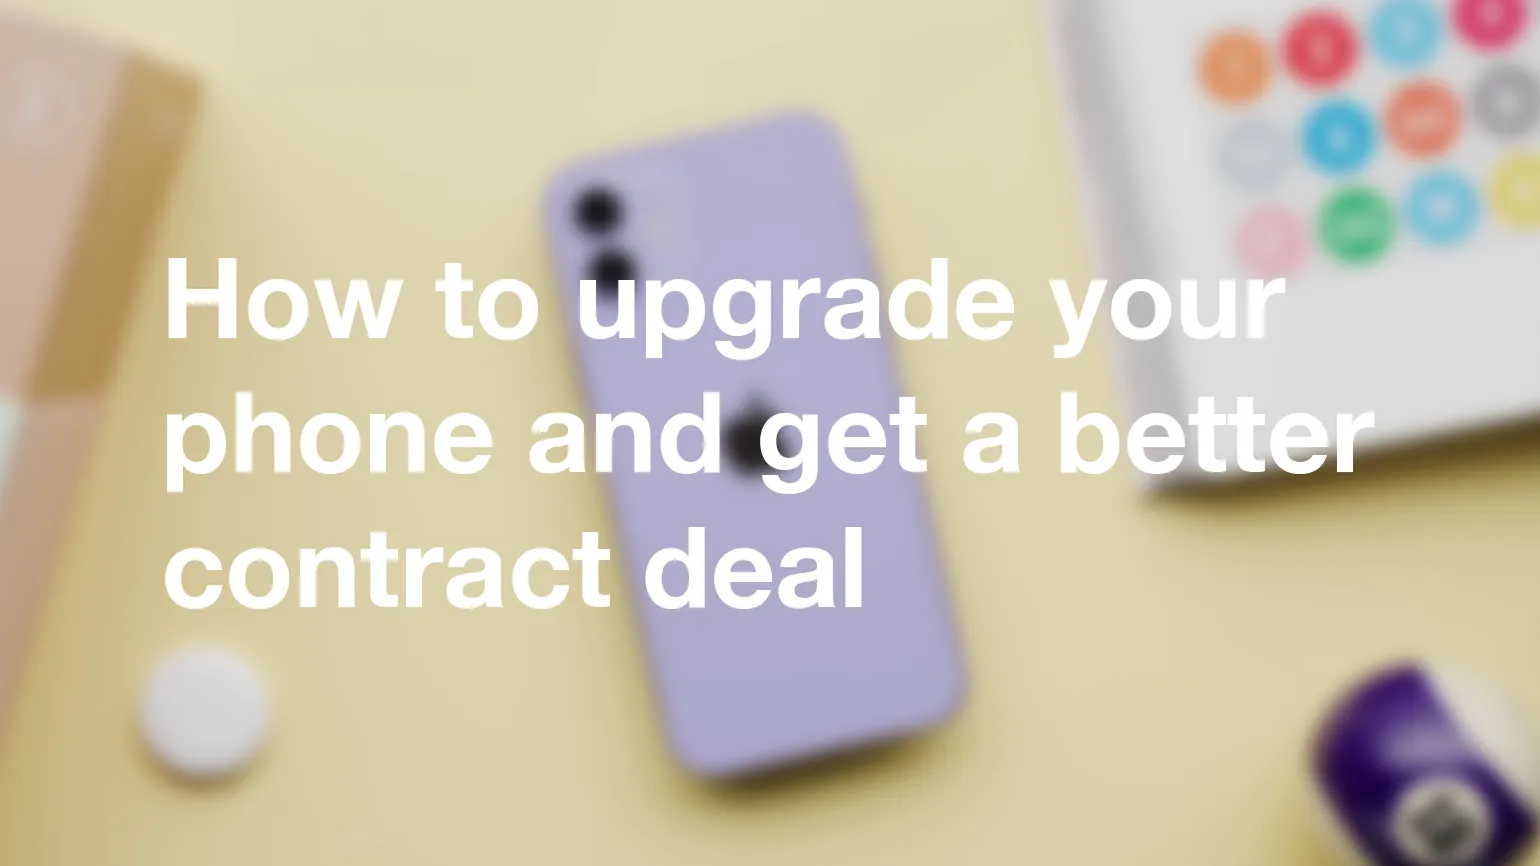 How to upgrade your phone and get a better contract deal